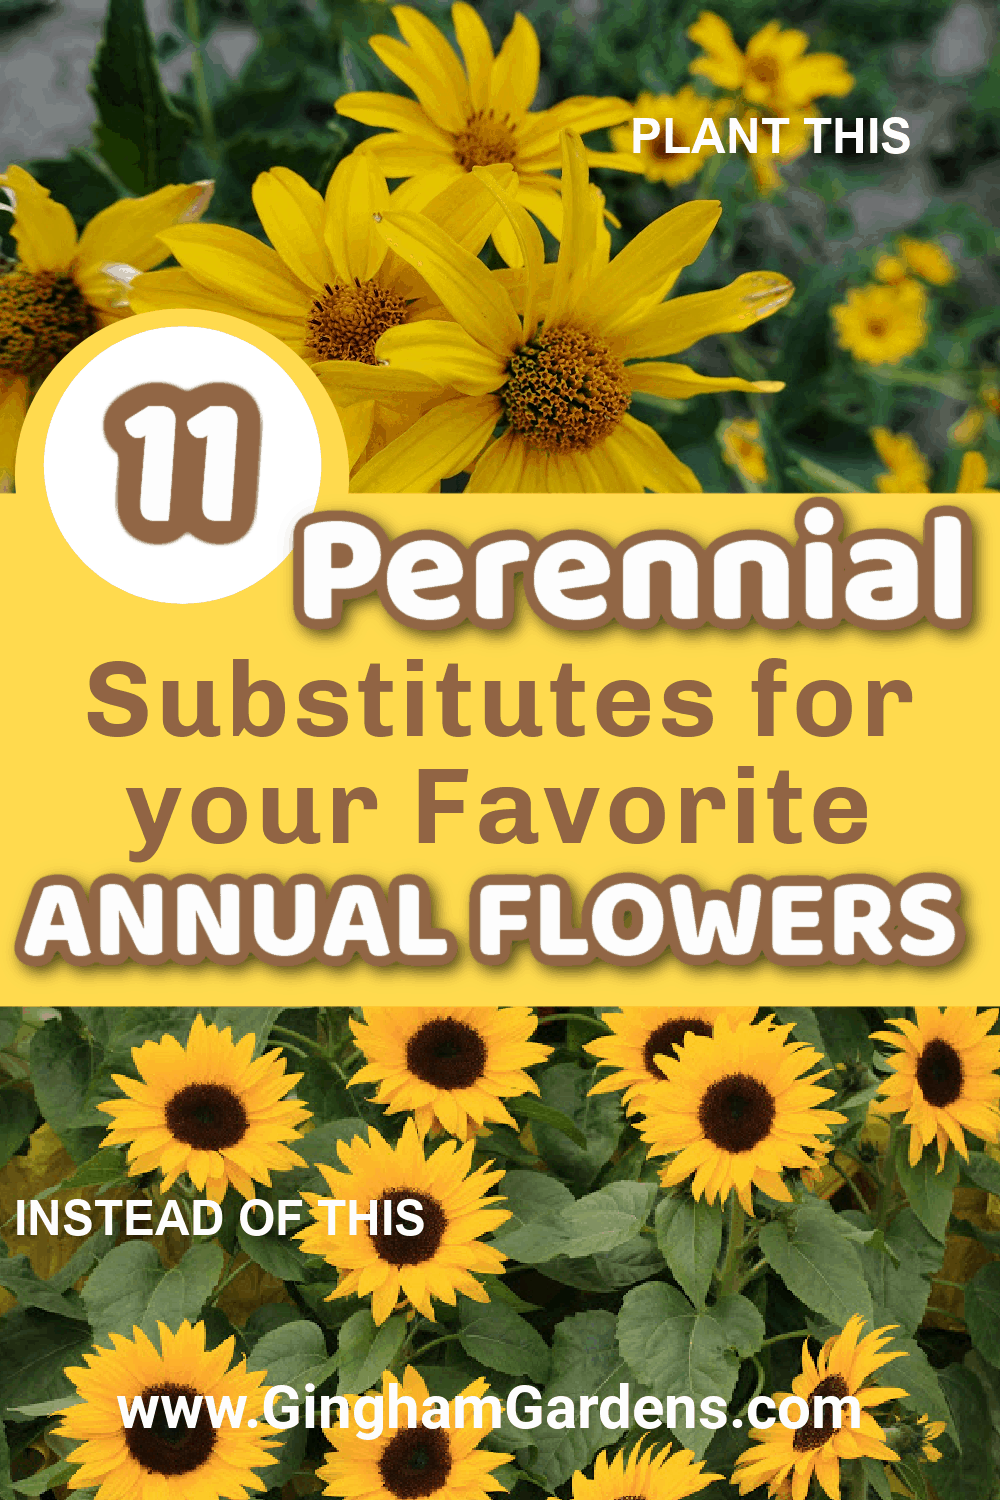 Images of Sunflowers with text overlay - 11 Perennial Substitutes for your Favorite Annual Flowers